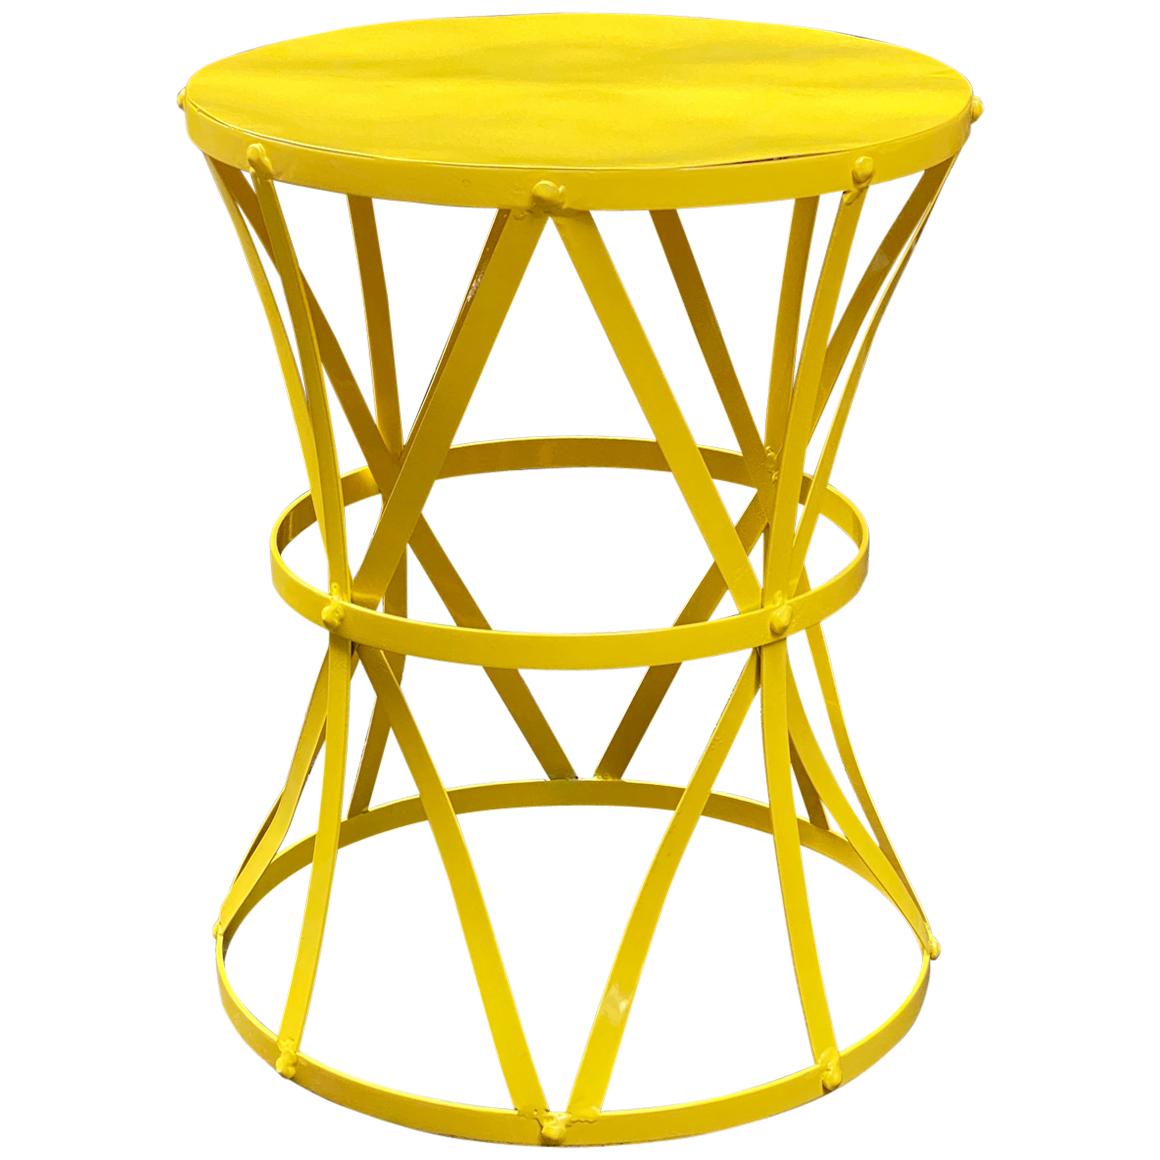 Strap Metal Canary Yellow Drum Table, 1960s